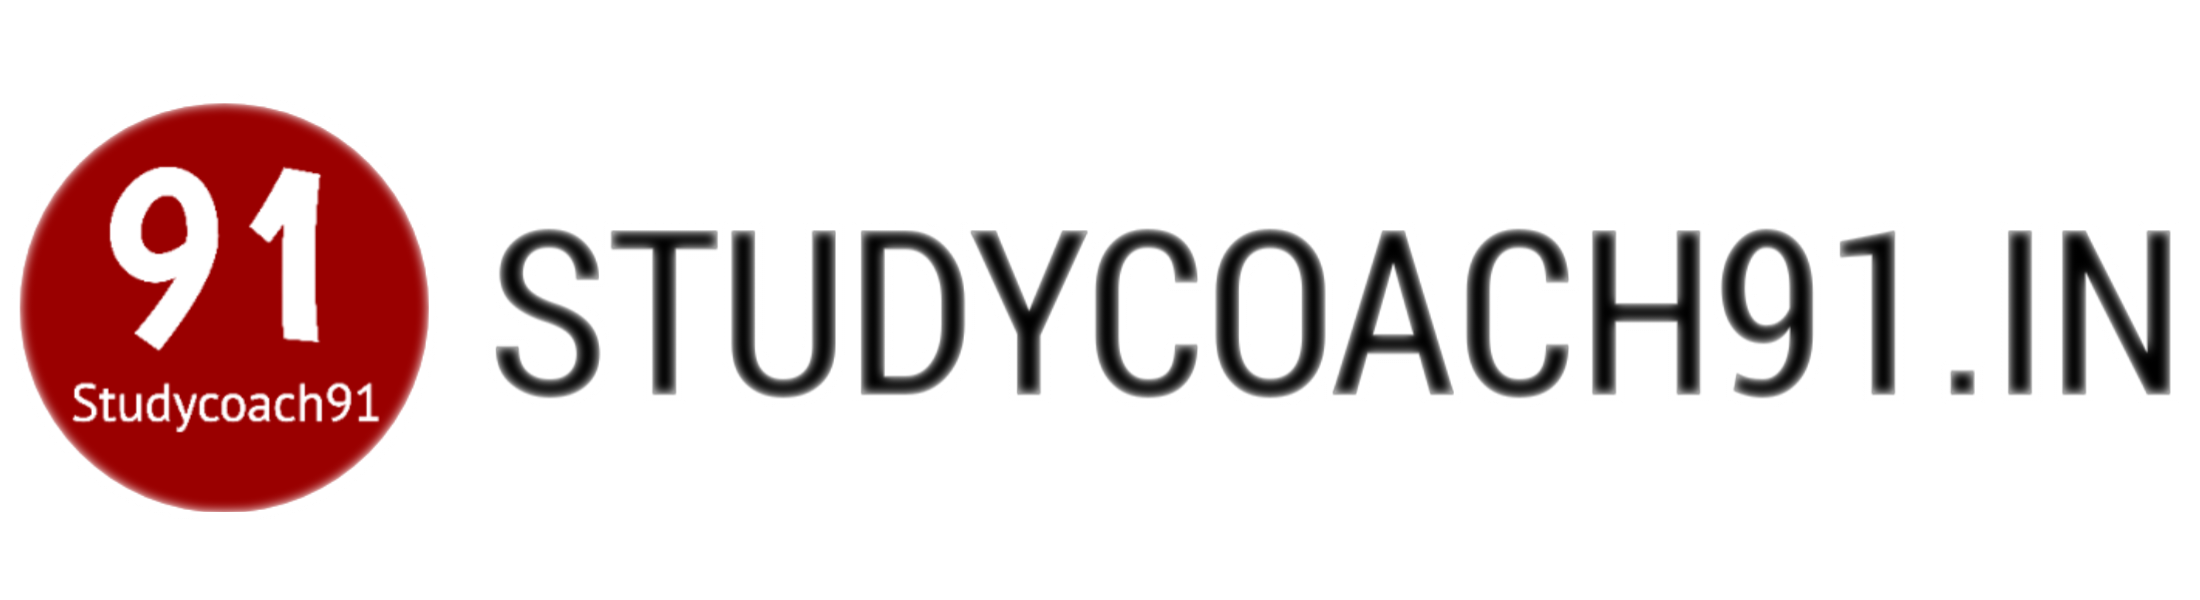 studycoach91.in